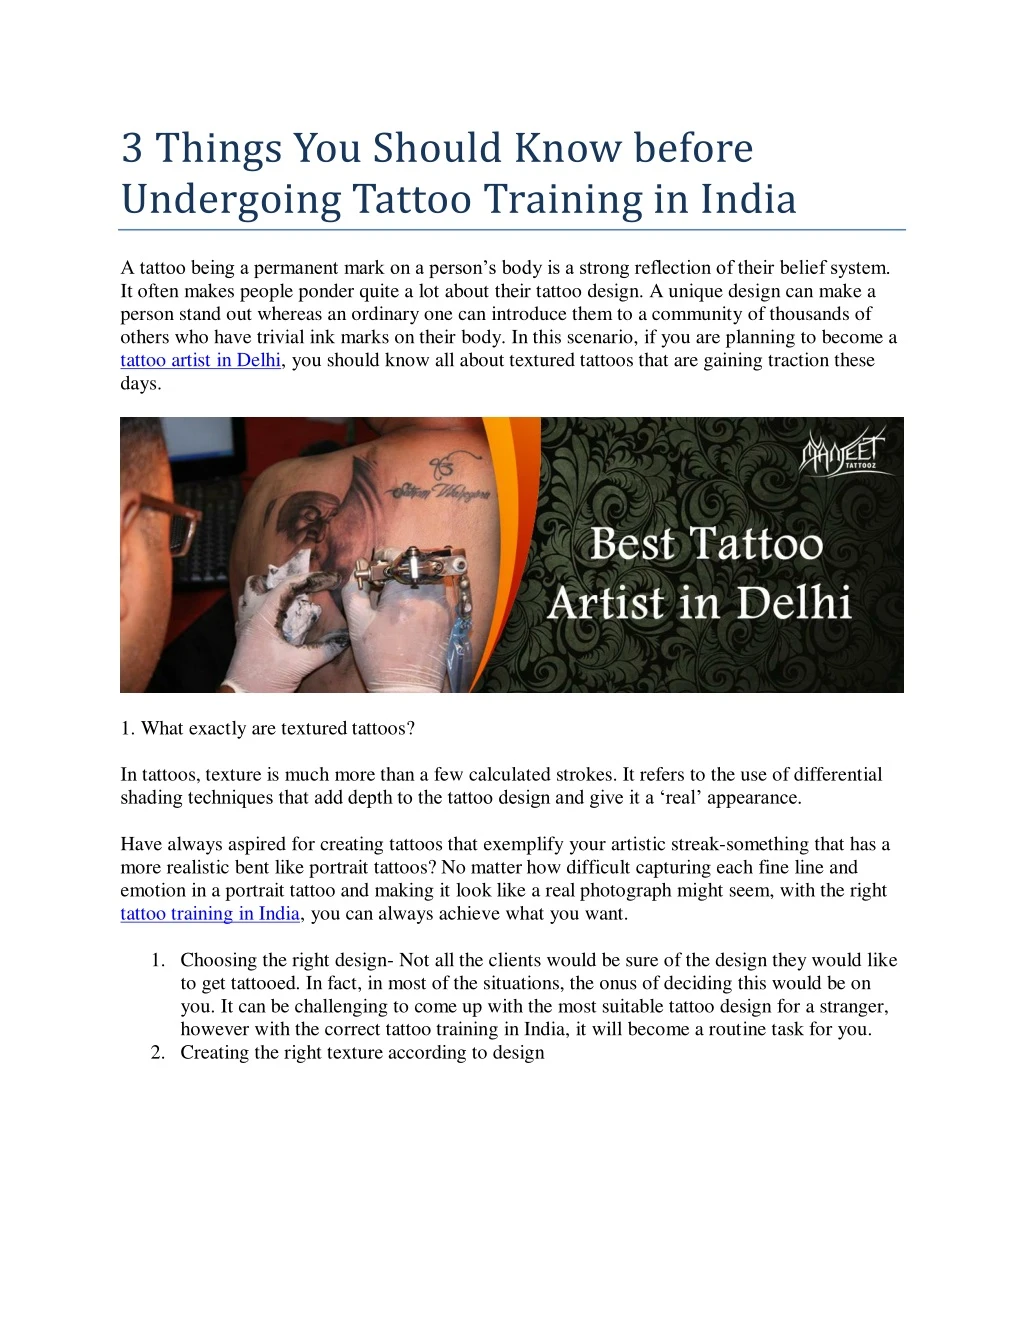 3 things you should know before undergoing tattoo